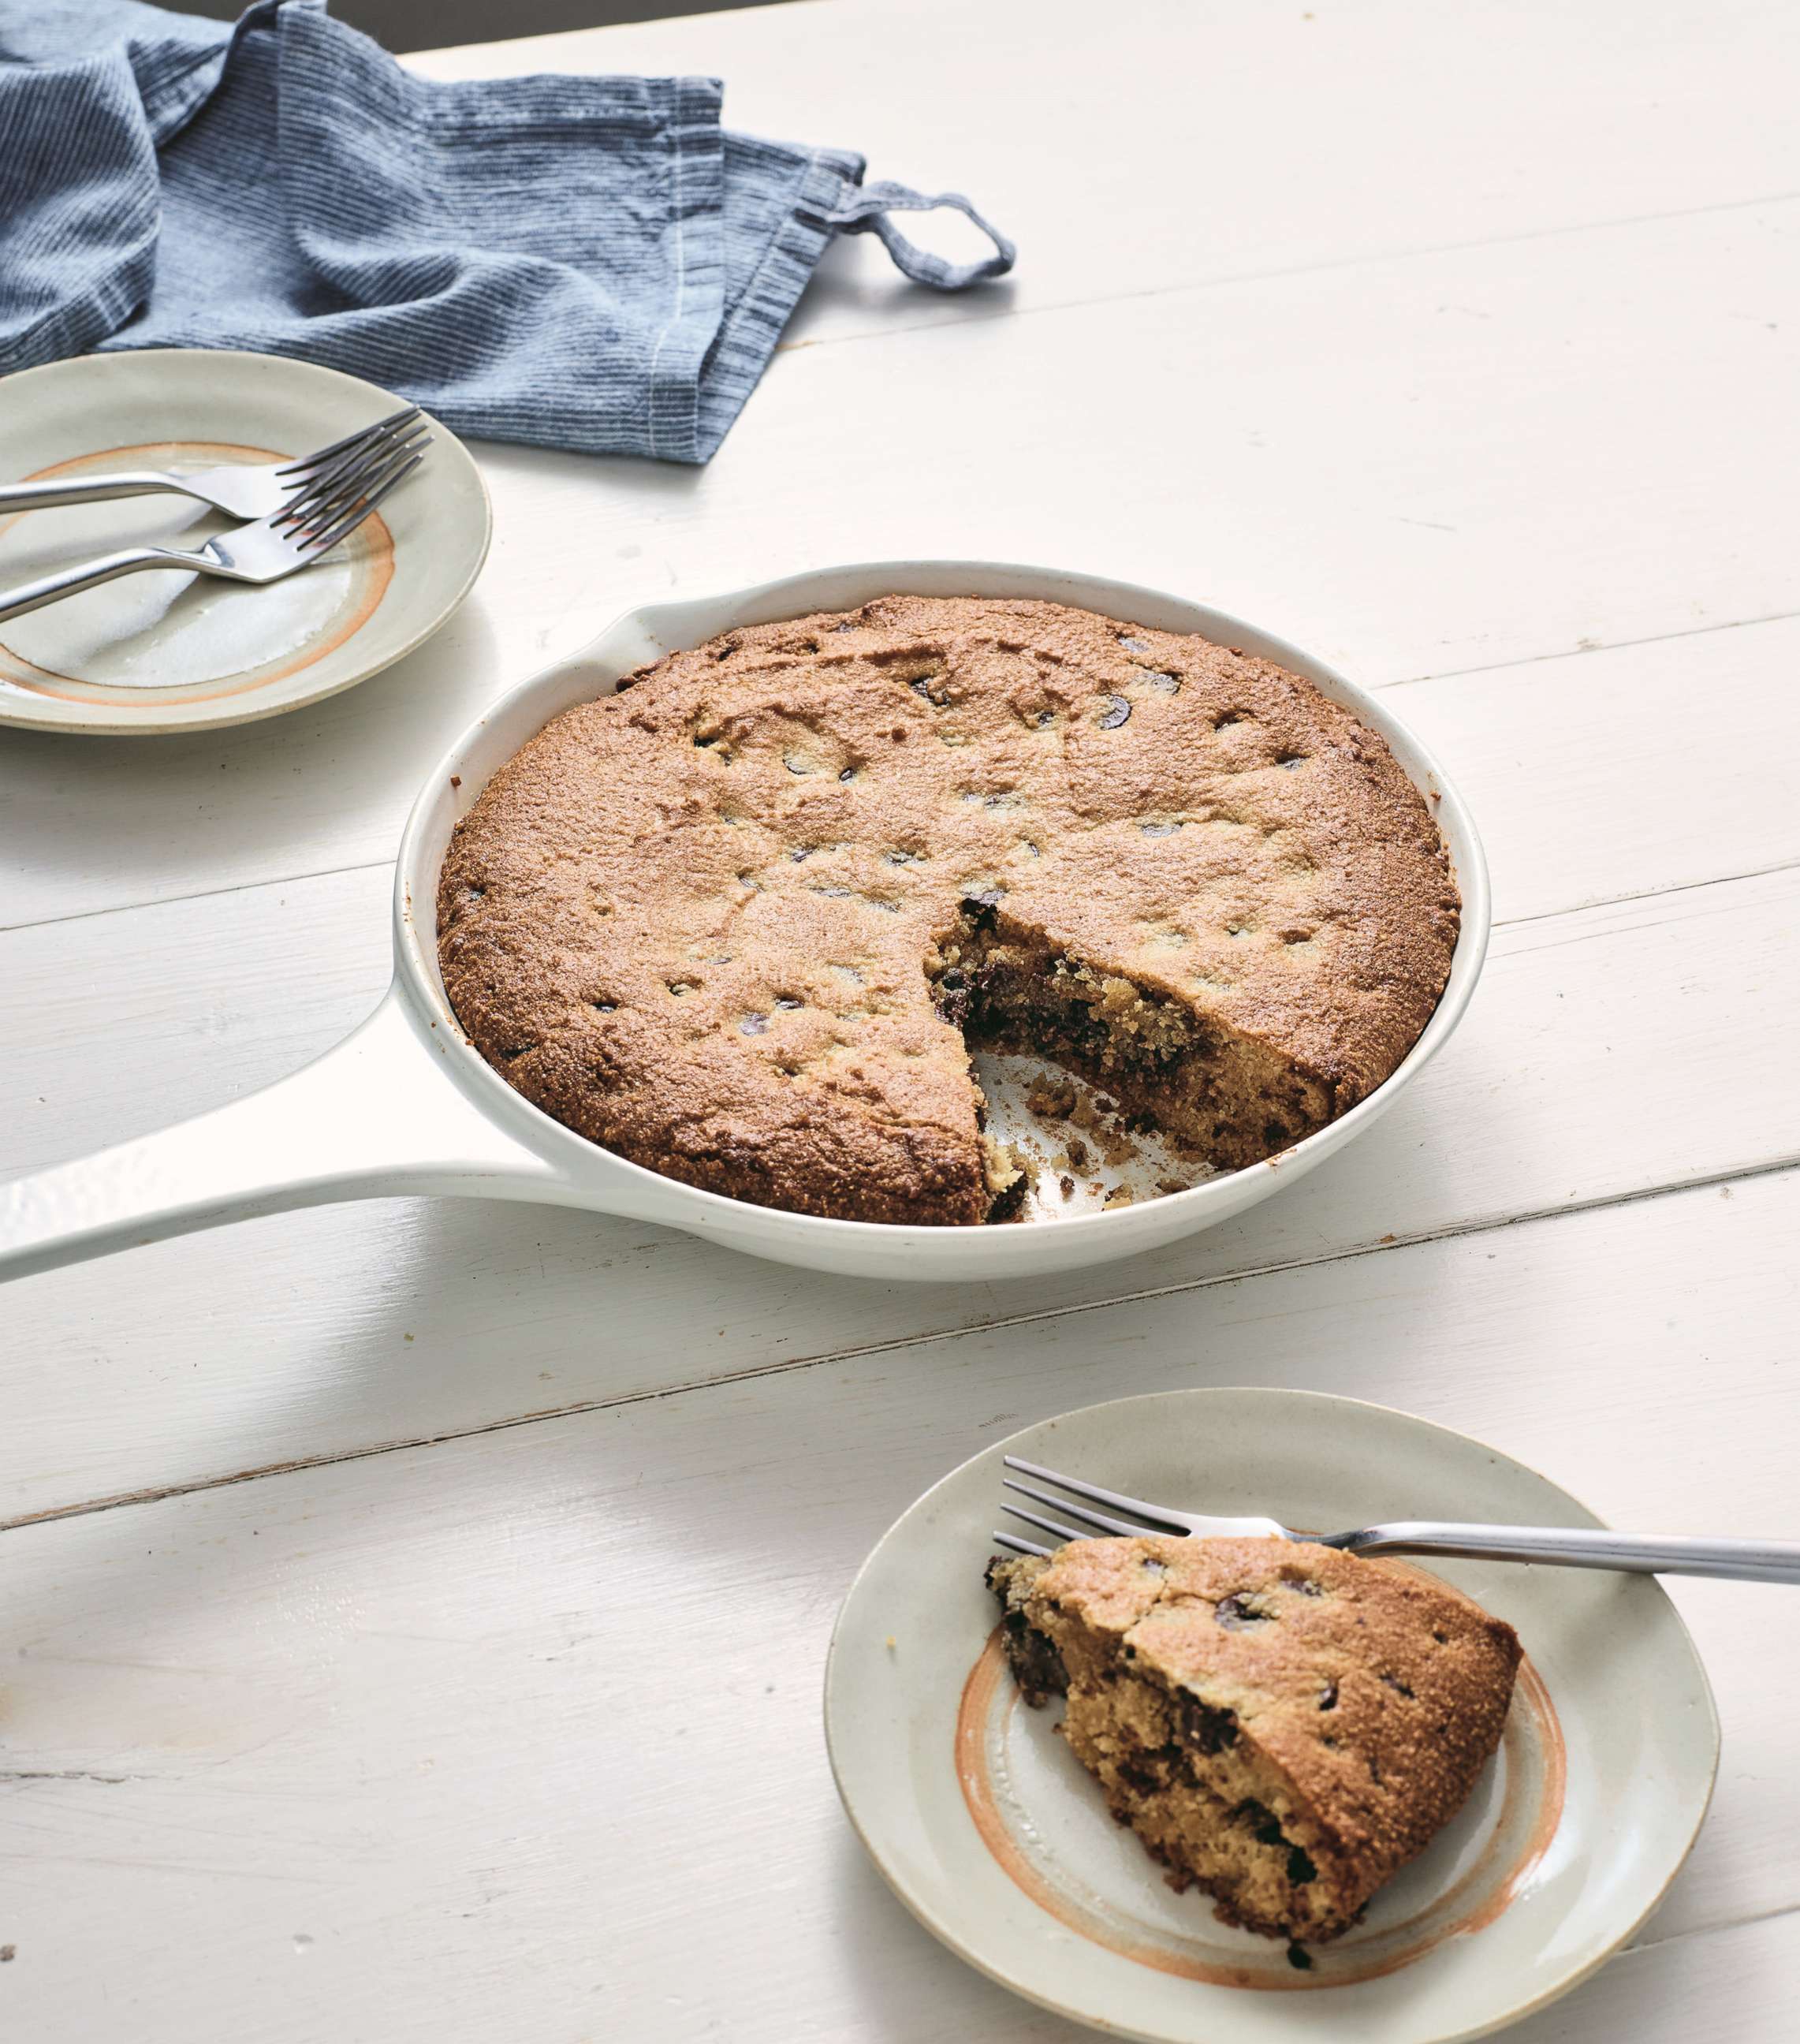 PHOTO: Chef Rocco DiSpirito's Chocolate Chip Skillet Cookie from his cookbook "Rocco's Keto Comfort Food Diet: Eat the Foods You Miss and Still Lose Up to a Pound a Day."